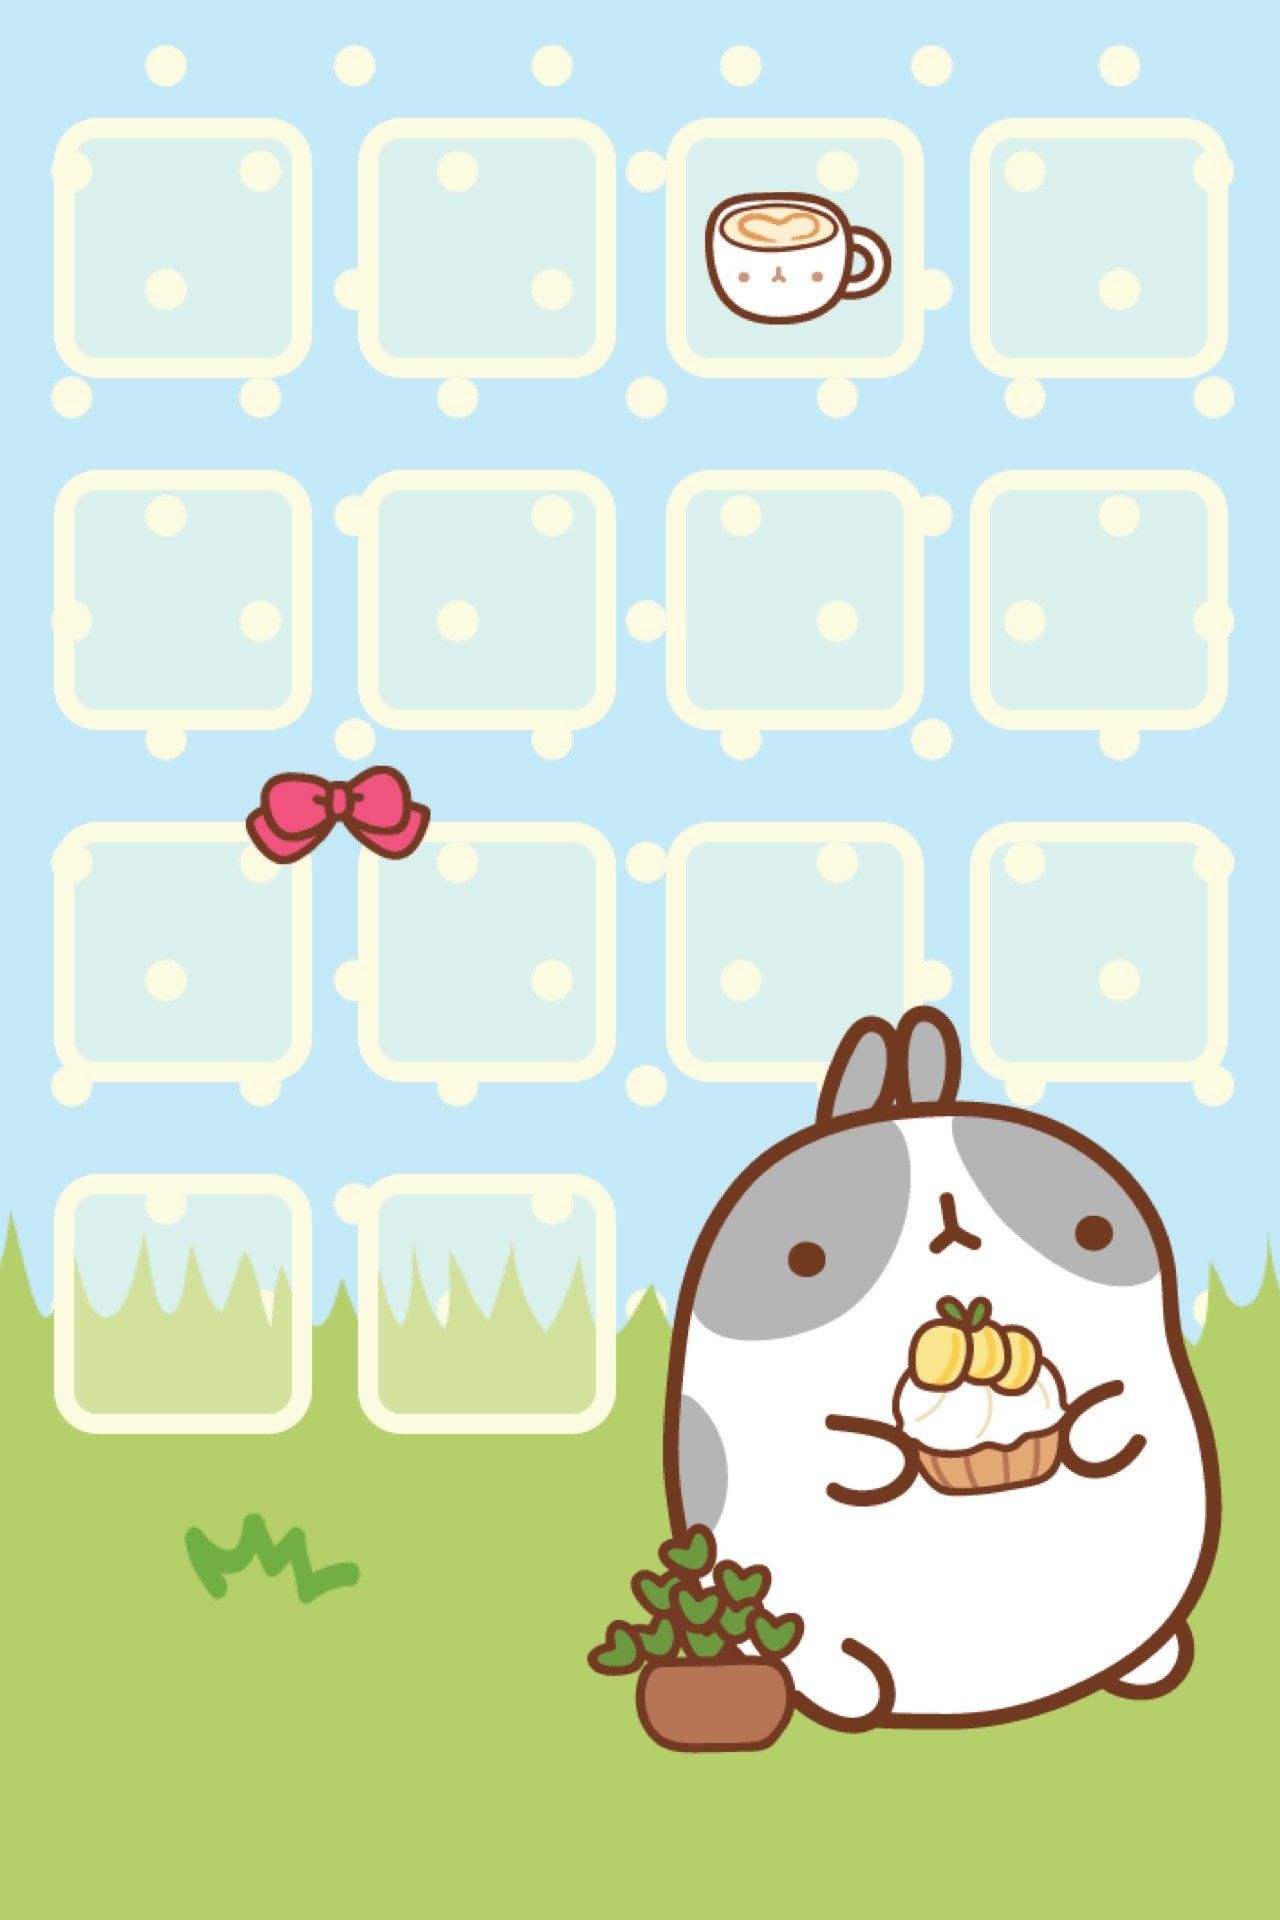 A cute little bunny sitting in the grass - Molang